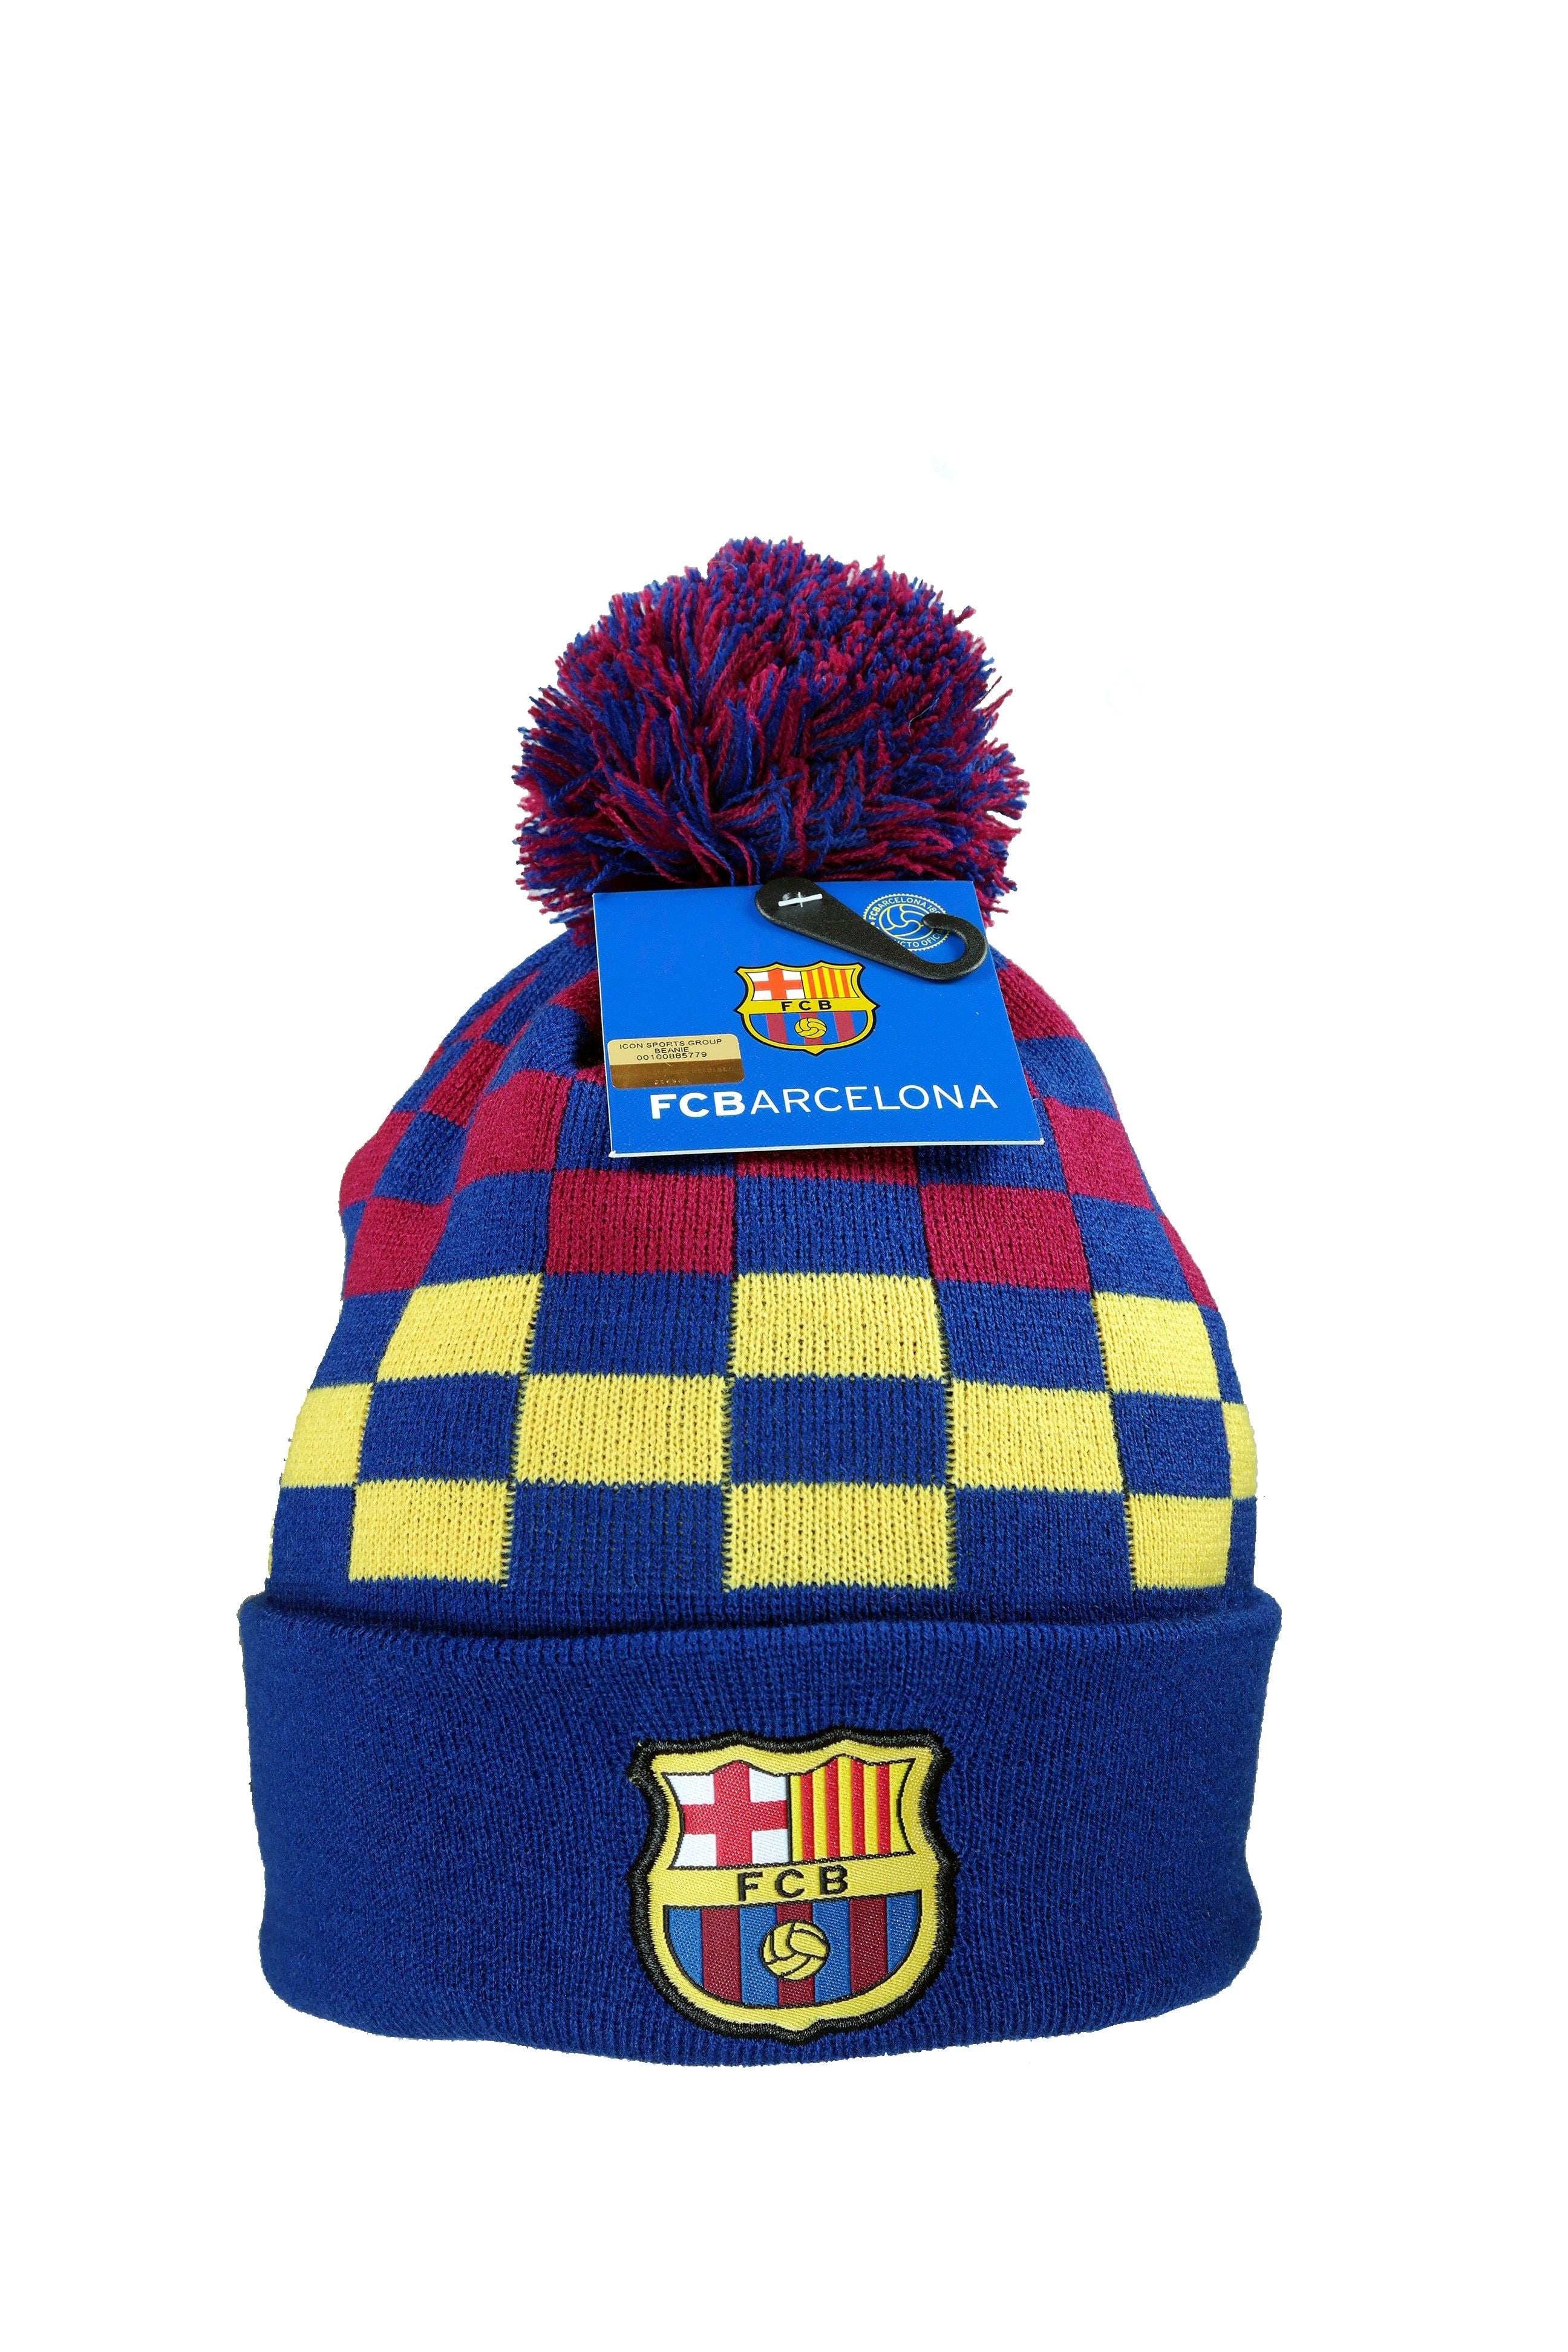 Barcelona FC Blue Knitted Beanie Winter Hat Football Club Crest Badge Official 